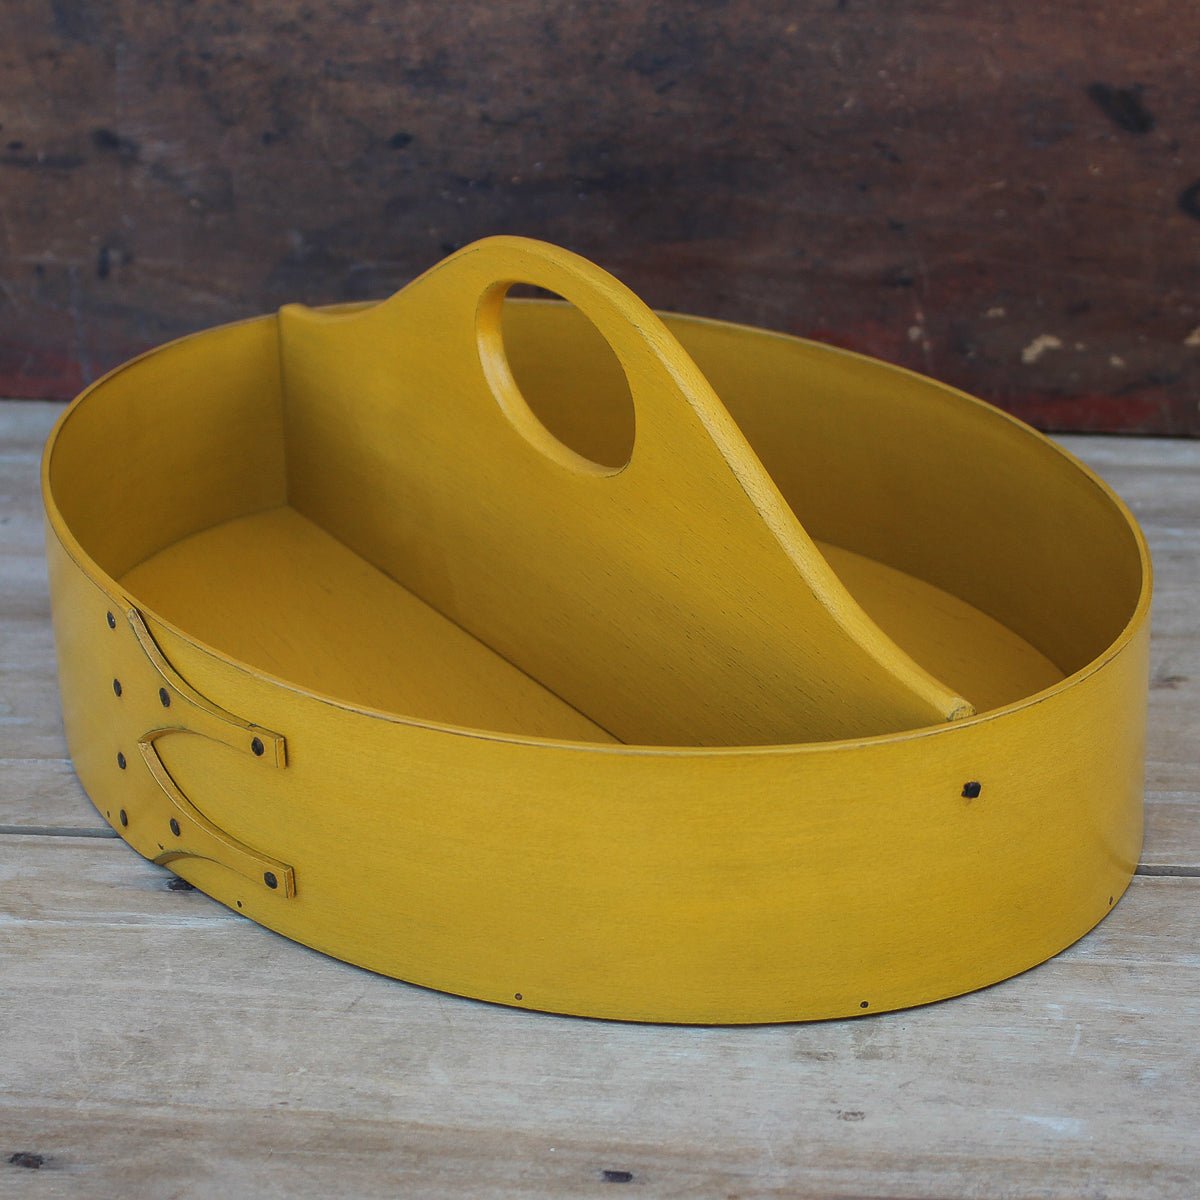 Shaker Style Divided Carrier, LeHays Shaker Boxes, Handcrafted in Maine, Yellow Milk Paint Finish, Side View